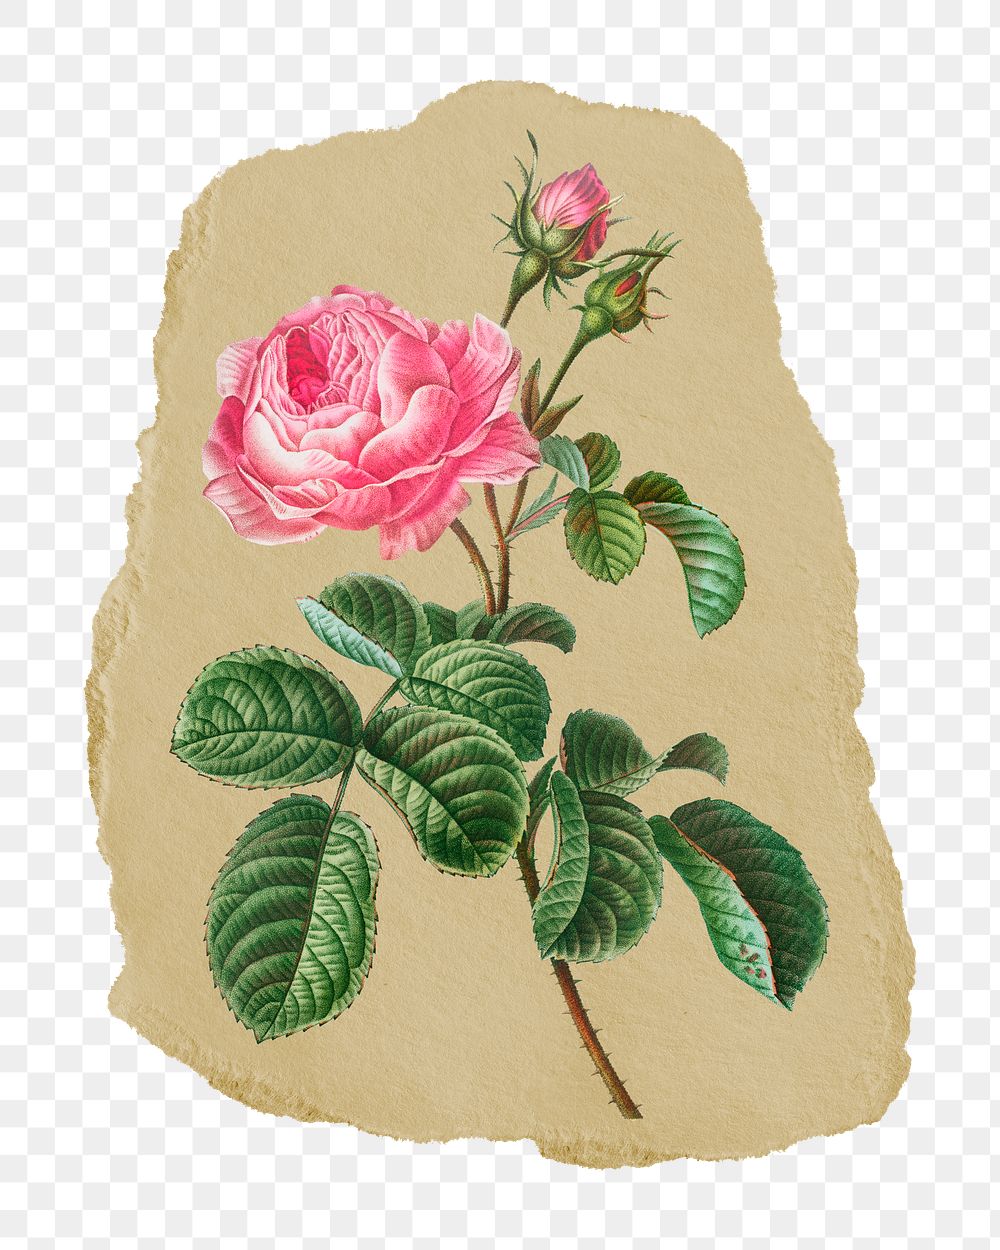 Png Redoute's Cabbage rose sticker, vintage illustration on ripped paper, transparent background